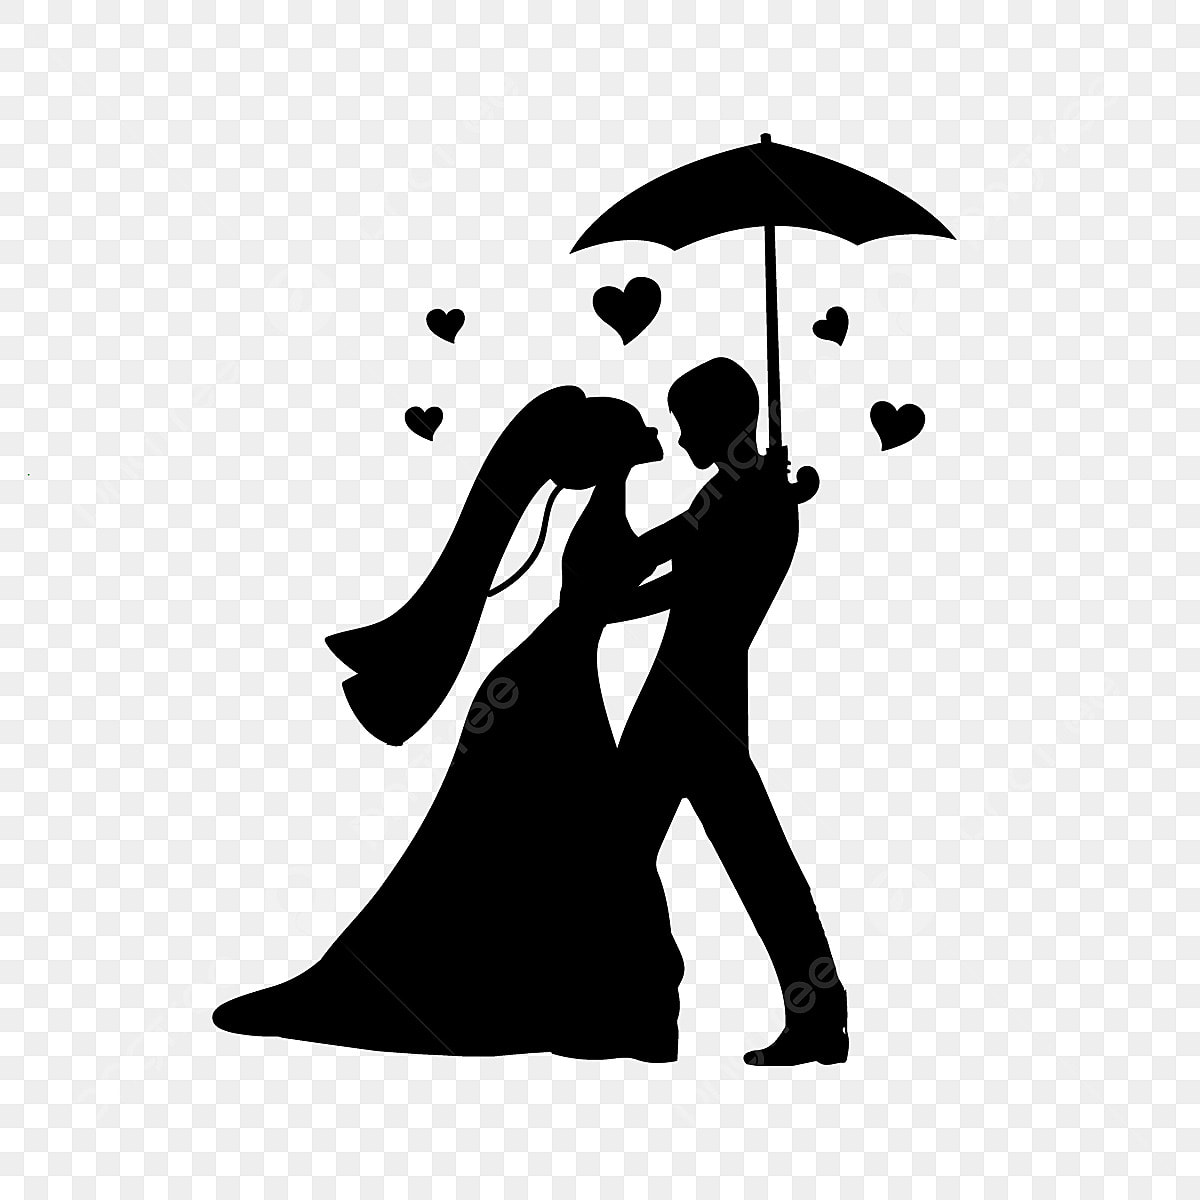 Black Cartoon Couple Embracing PNG Image, Cartoon Clipart, Lovers, Embrace PNG Transparent Background